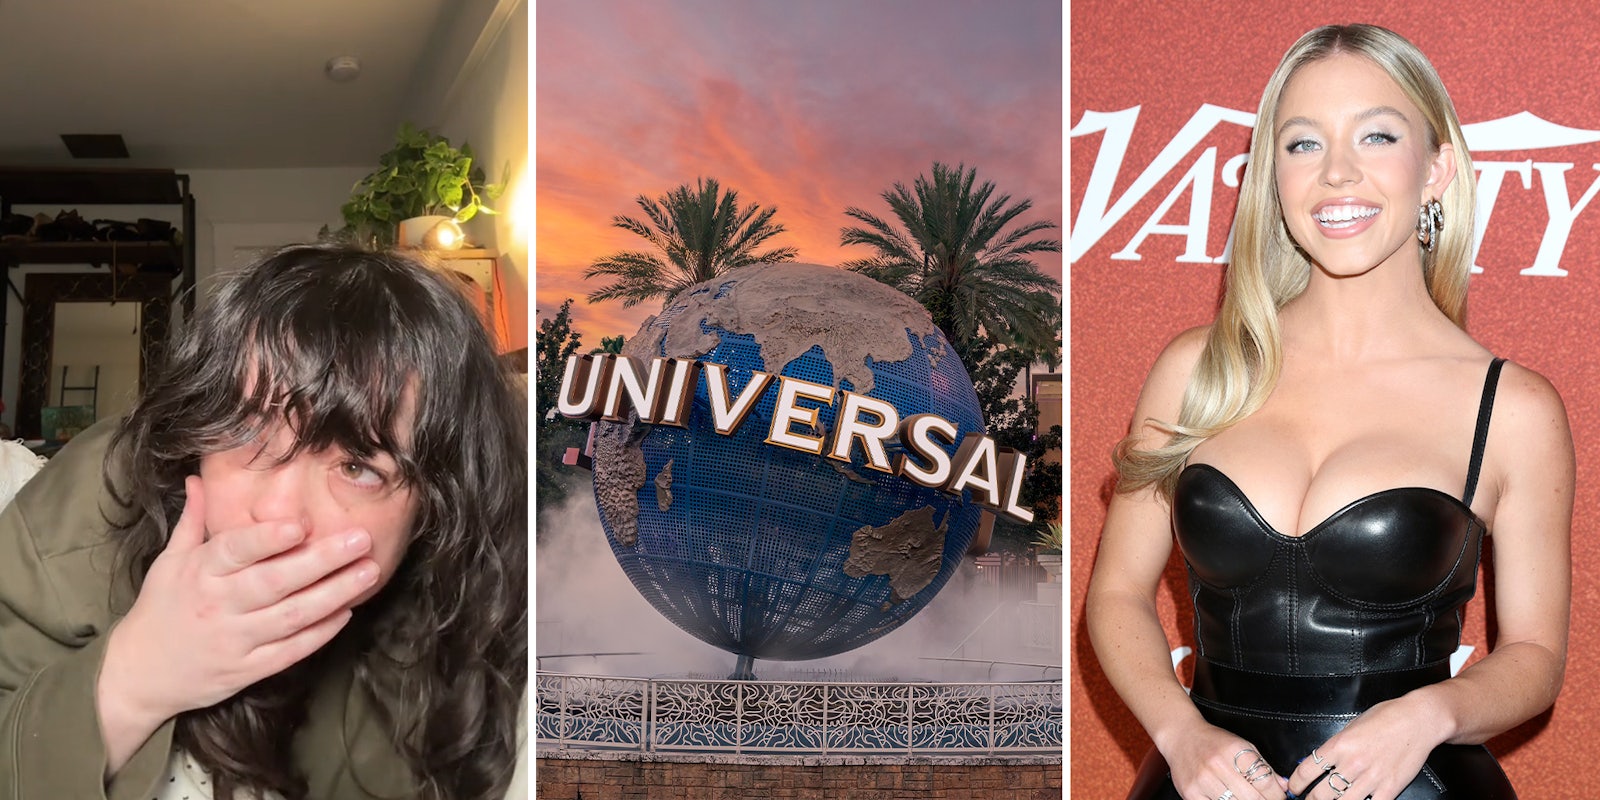 Fans are calling out Sydney Sweeney for allegedly lying about being a Universal Studios tour guide